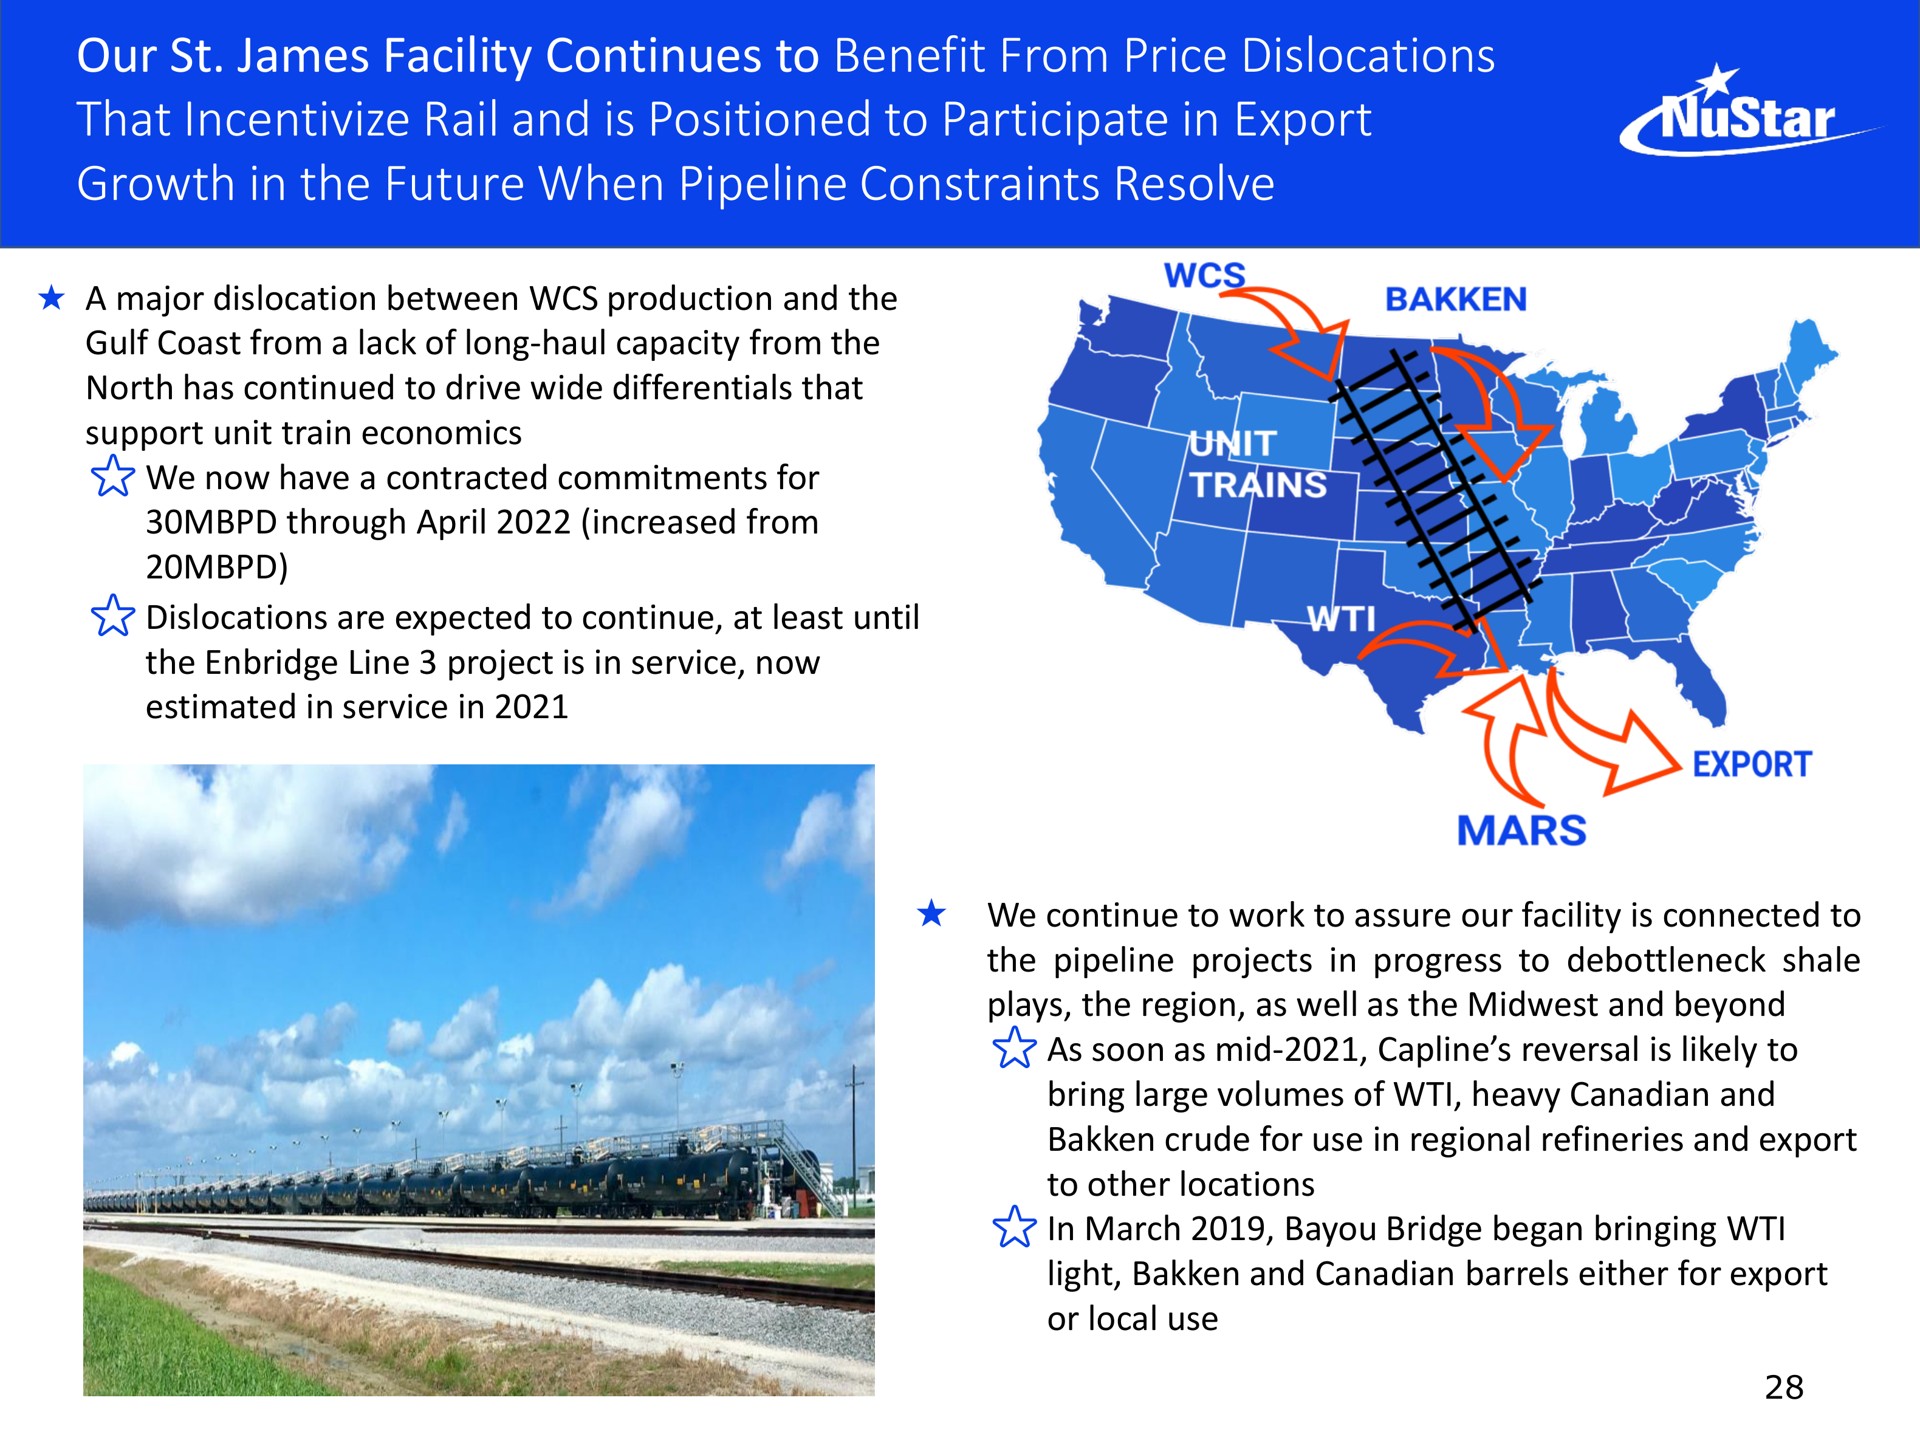 our james facility continues to benefit from price dislocations that rail and is positioned to participate in export growth in the future when pipeline constraints resolve | NuStar Energy